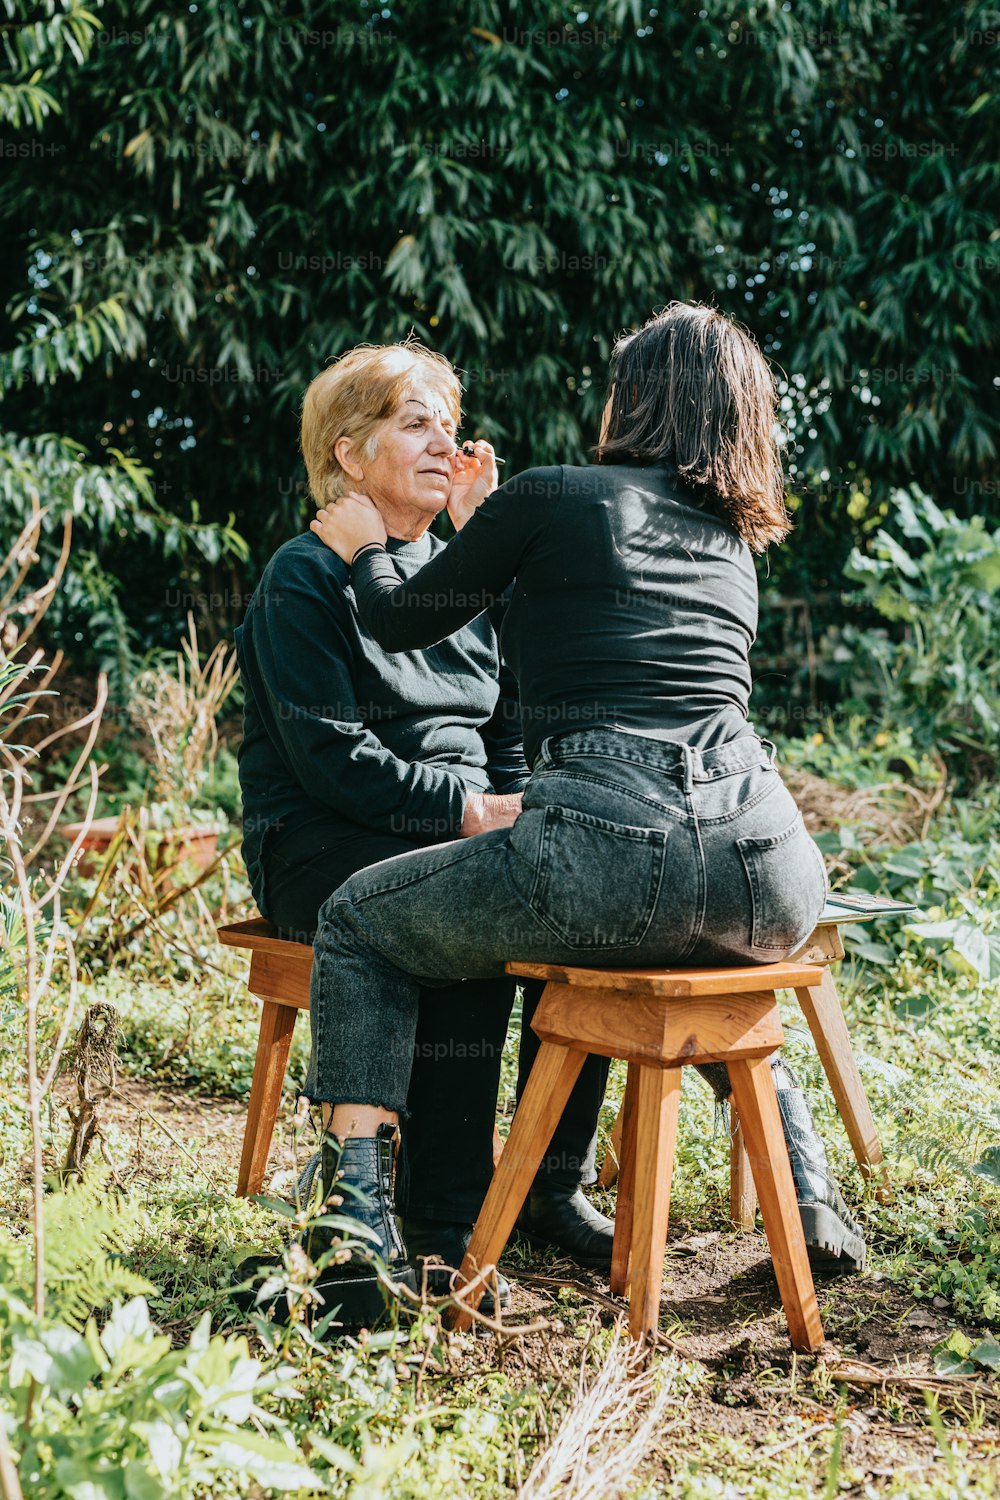 a woman sitting on top of a wooden stool next to another woman